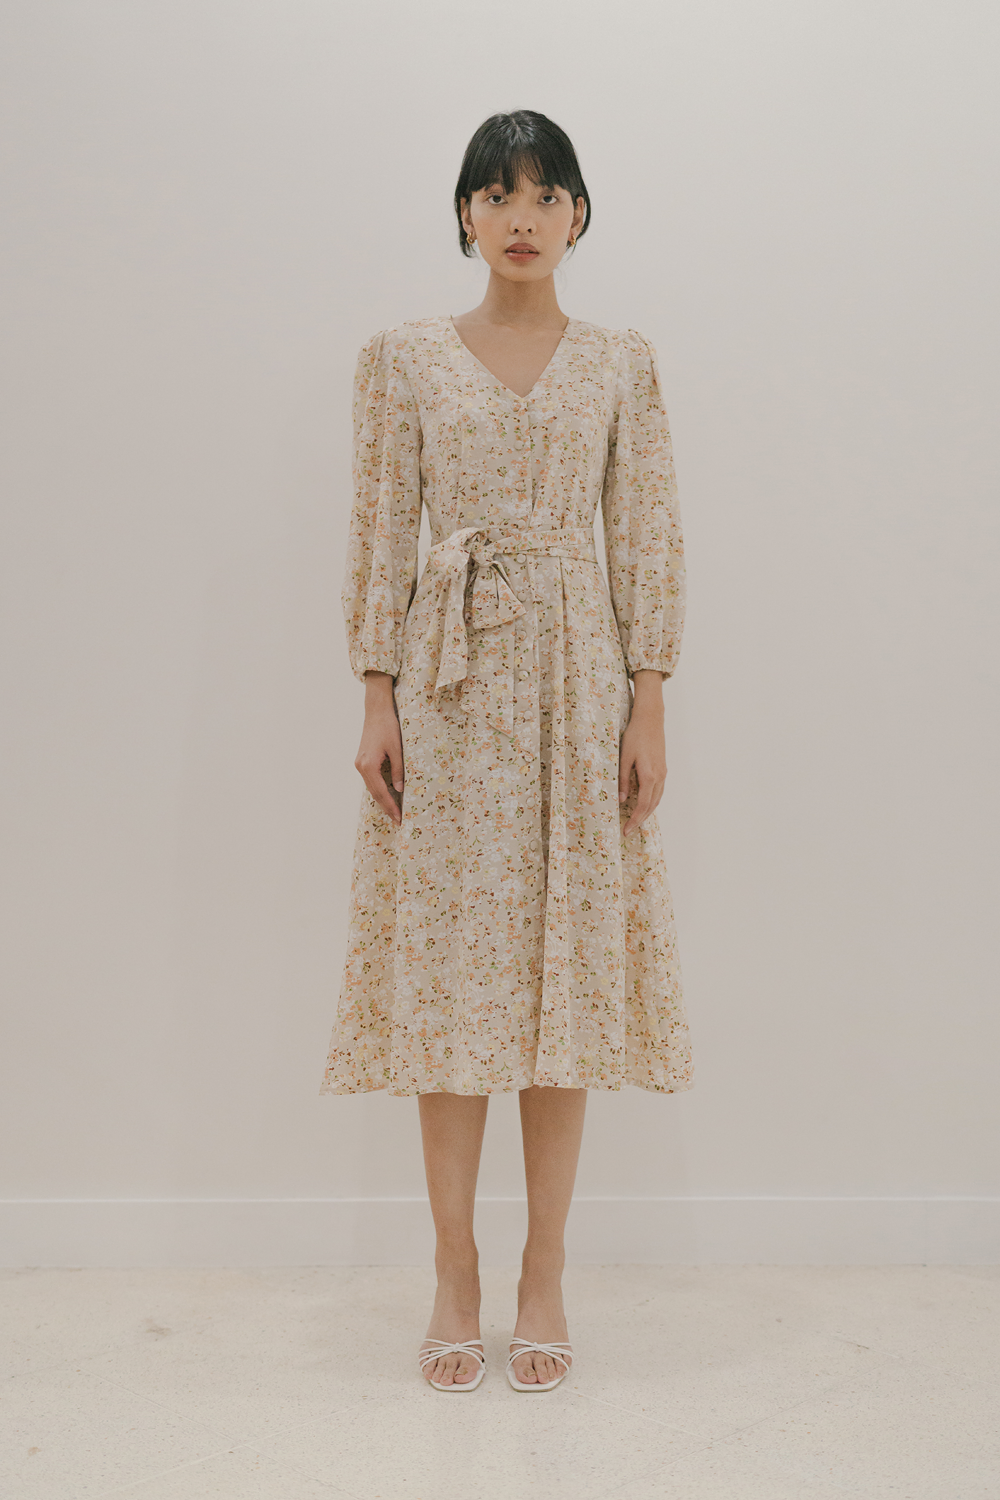 Handa Button Down Dress in Brown Floral (30% OFF)